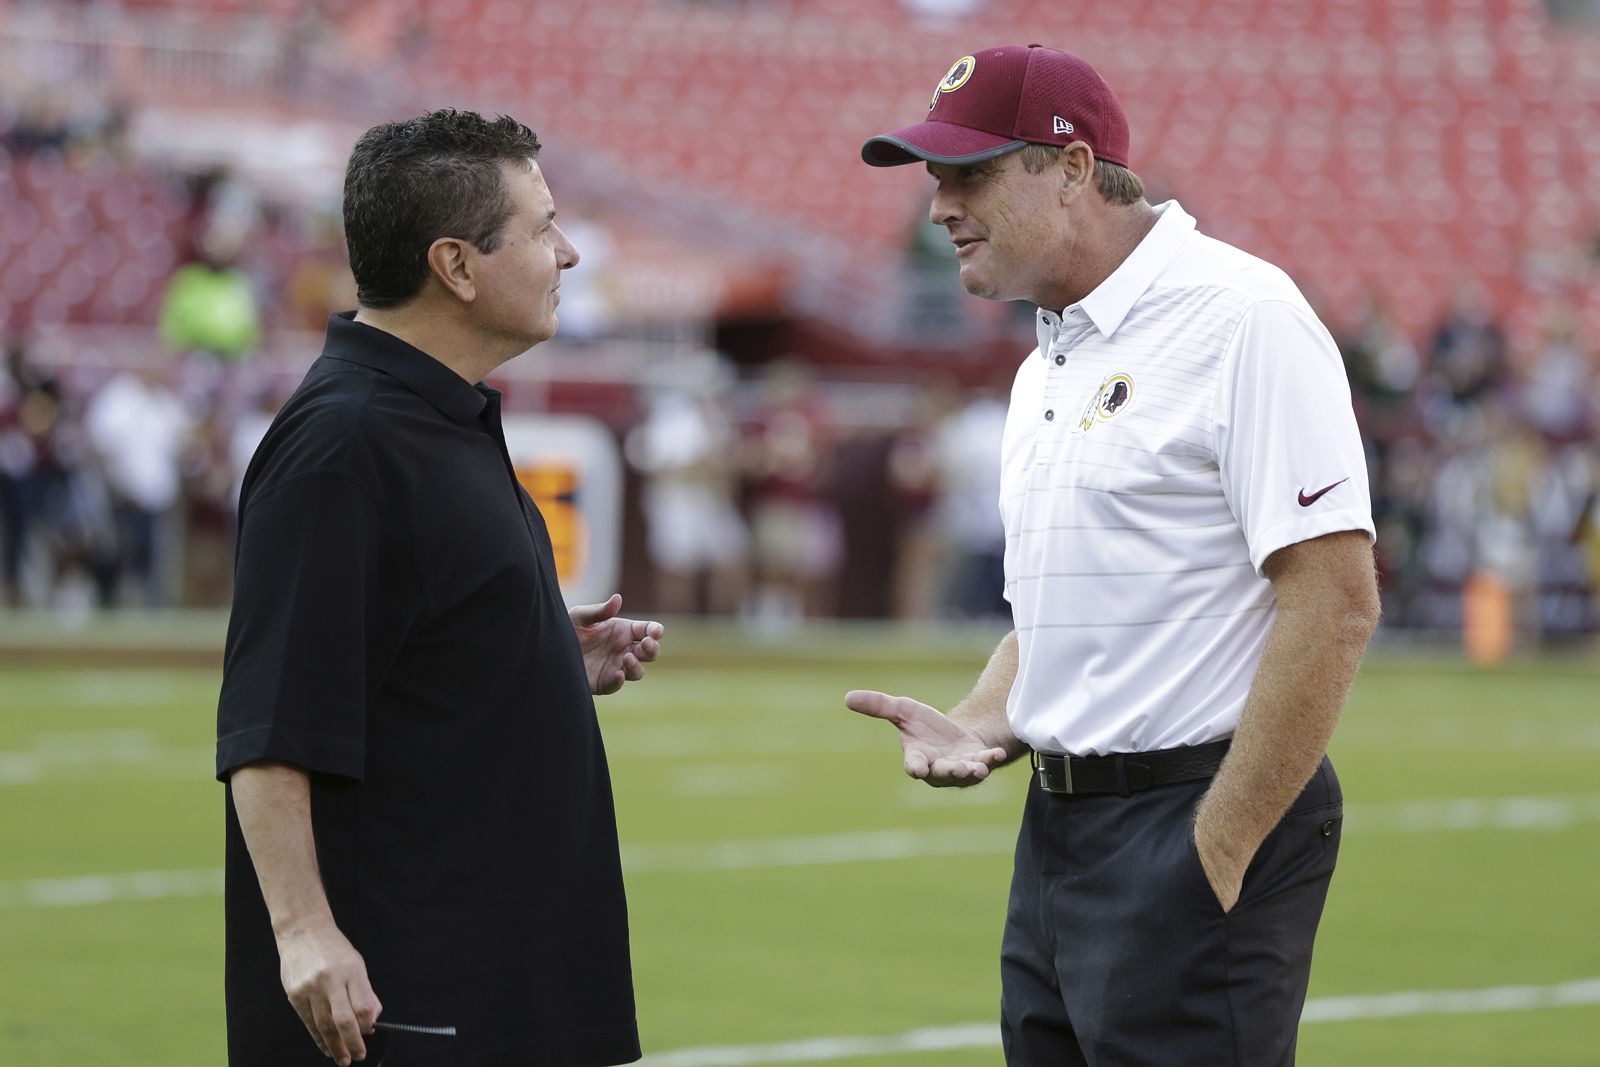 Washington Redskins owner Dan Snyder talks with head coach Jay Gruden, right, before an NFL pre-season football game against the Green Bay Packers in Landover, Md., Saturday, Aug. 19, 2017. (AP Photo/Mark Tenally)